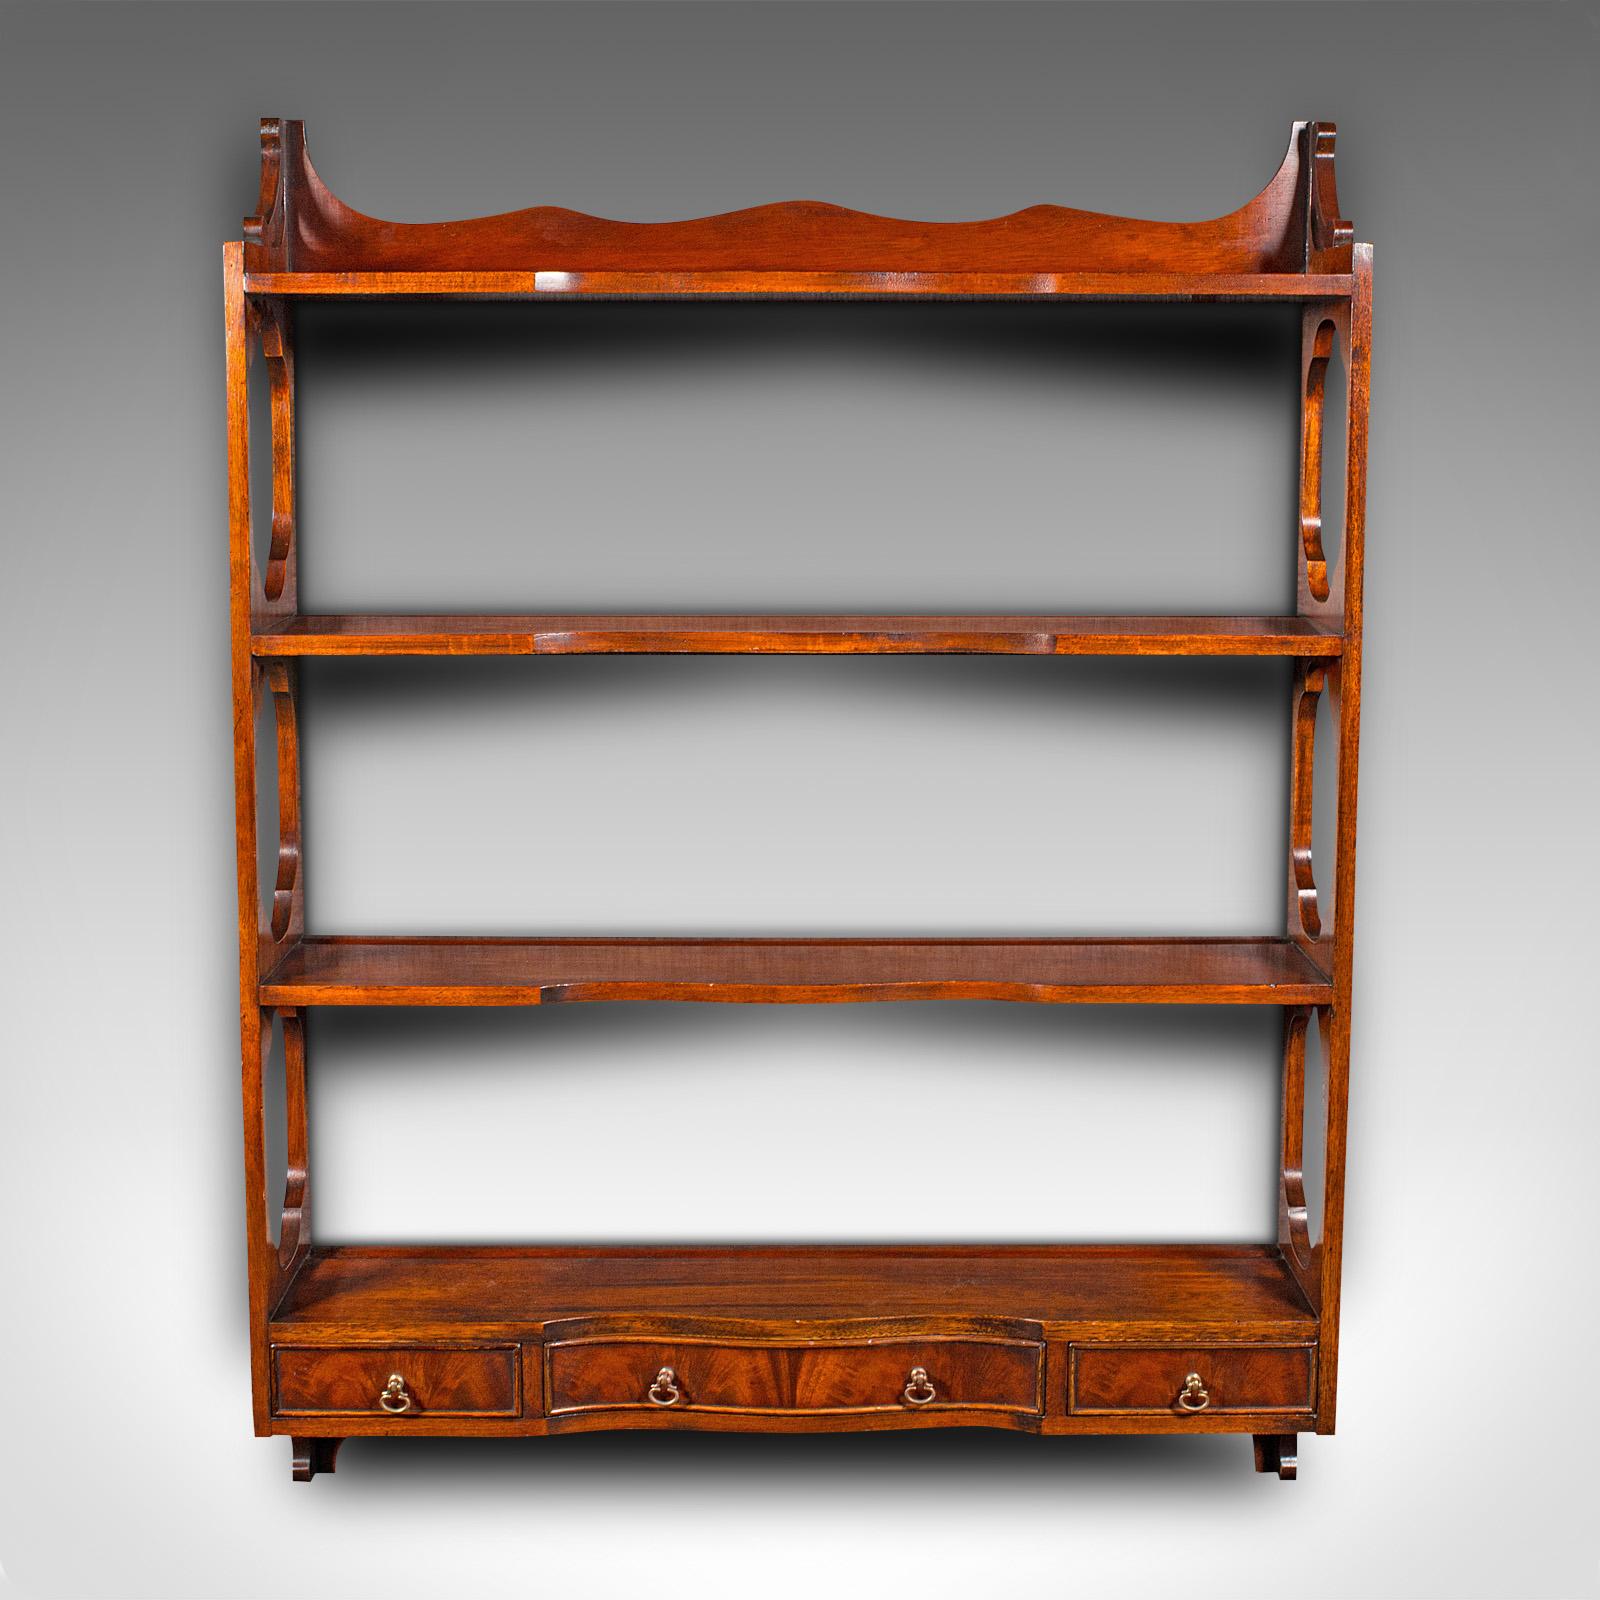 This is a vintage Georgian revival whatnot. An English, walnut set of mounted shelves, dating to the late 20th century, circa 1980.

Of superb quality, with striking detail redolent of Georgian taste
Displays a desirable aged patina and in good